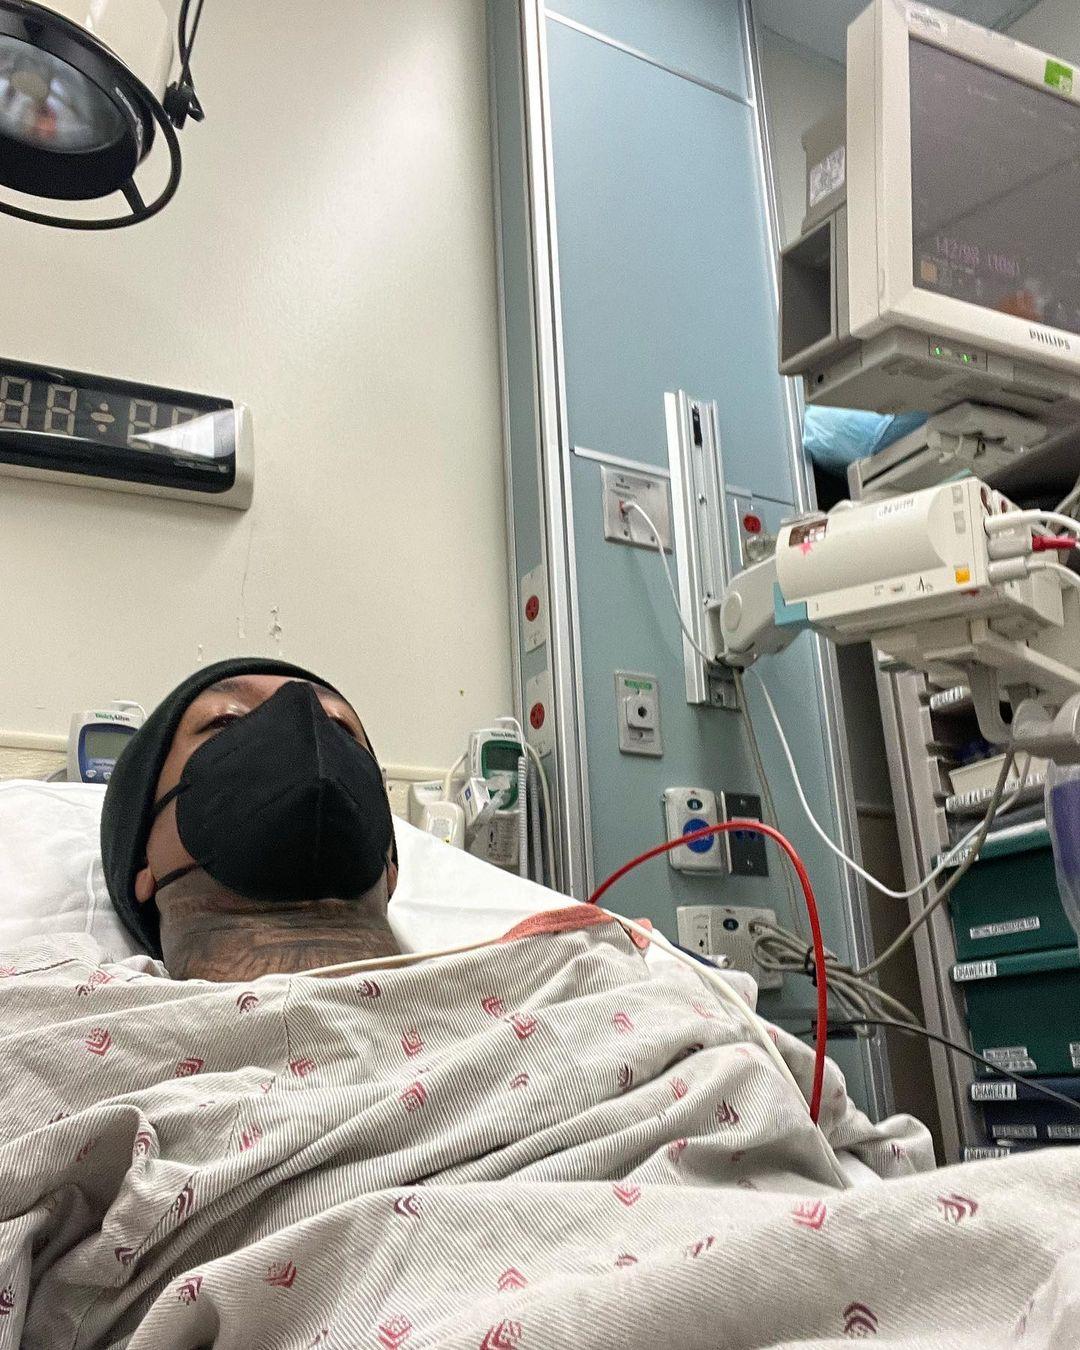 Nick Cannon Hospitalized Following Pneumonia Health Scare - 'I Don't Need Any Well Wishes'